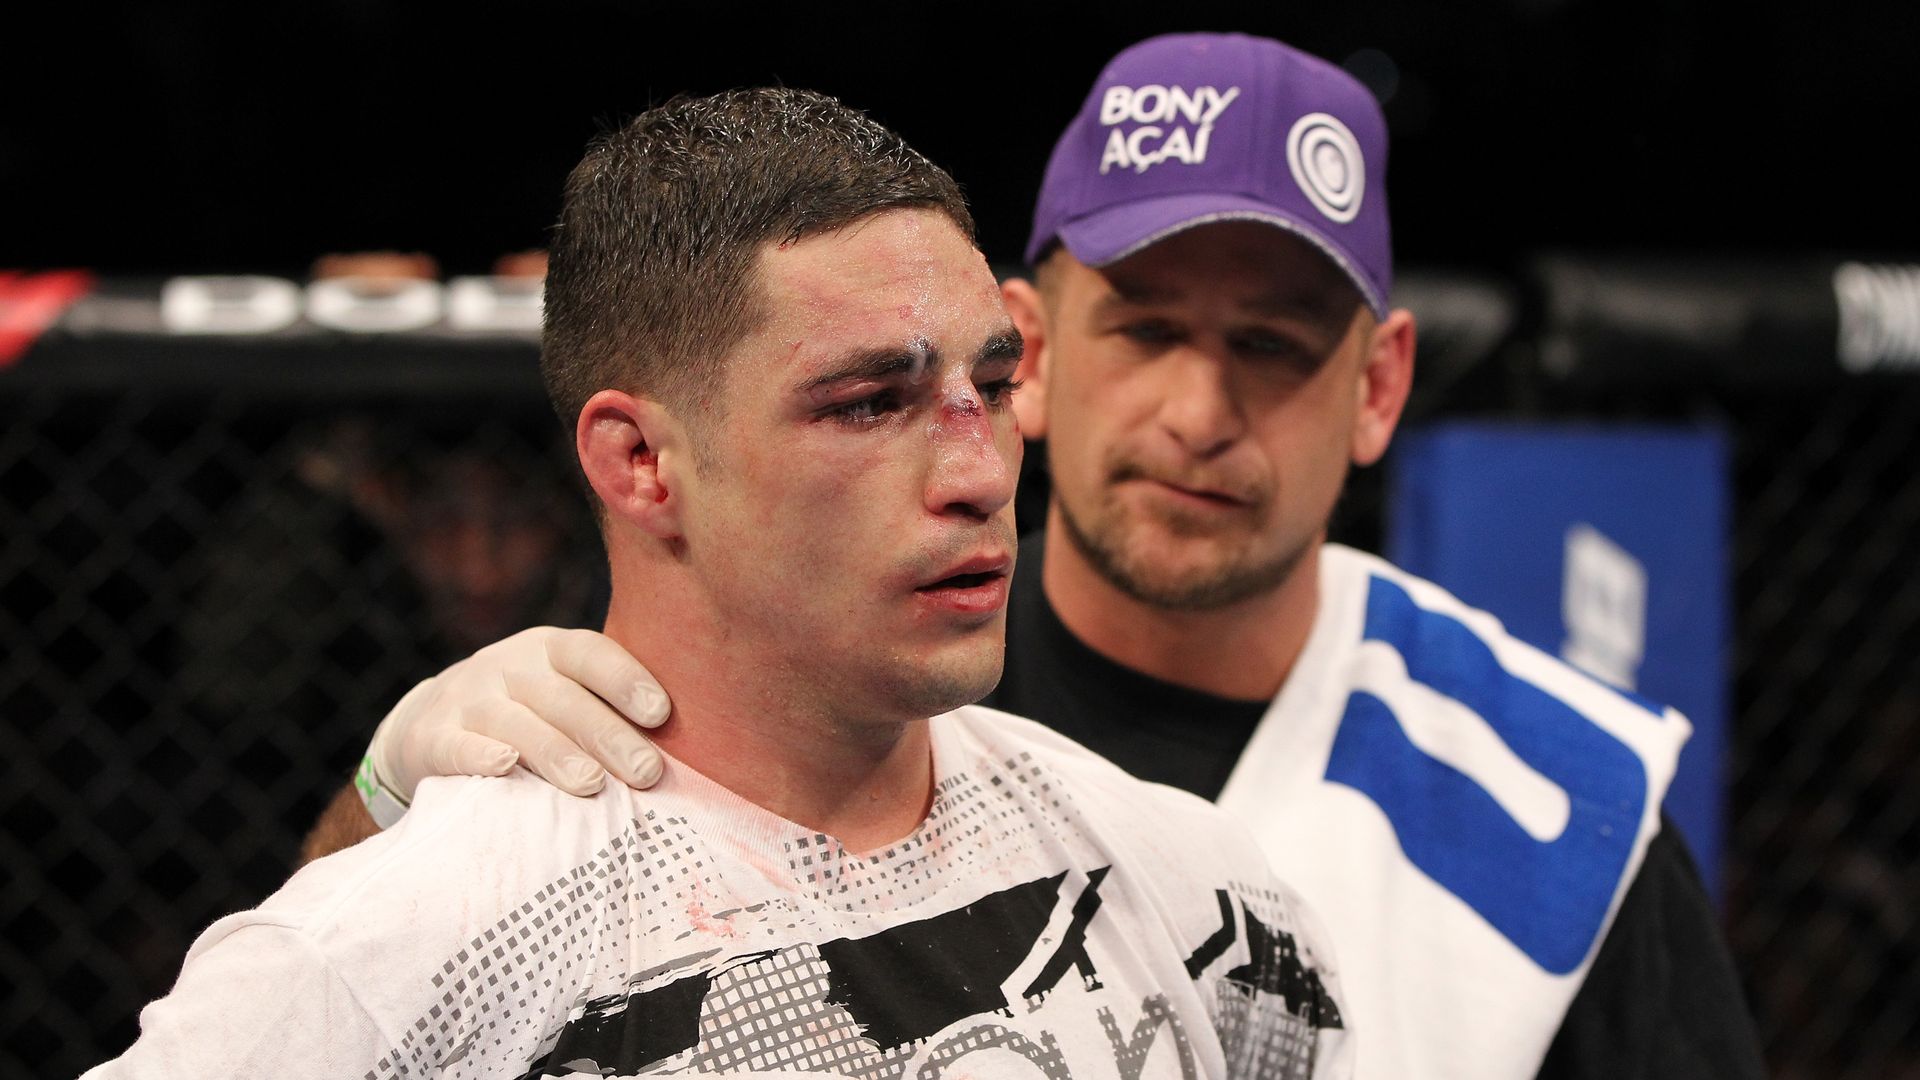 Trainer Greg Jackson appears with a battle-scarred MMA fighter Diego Sanchez after a fight.